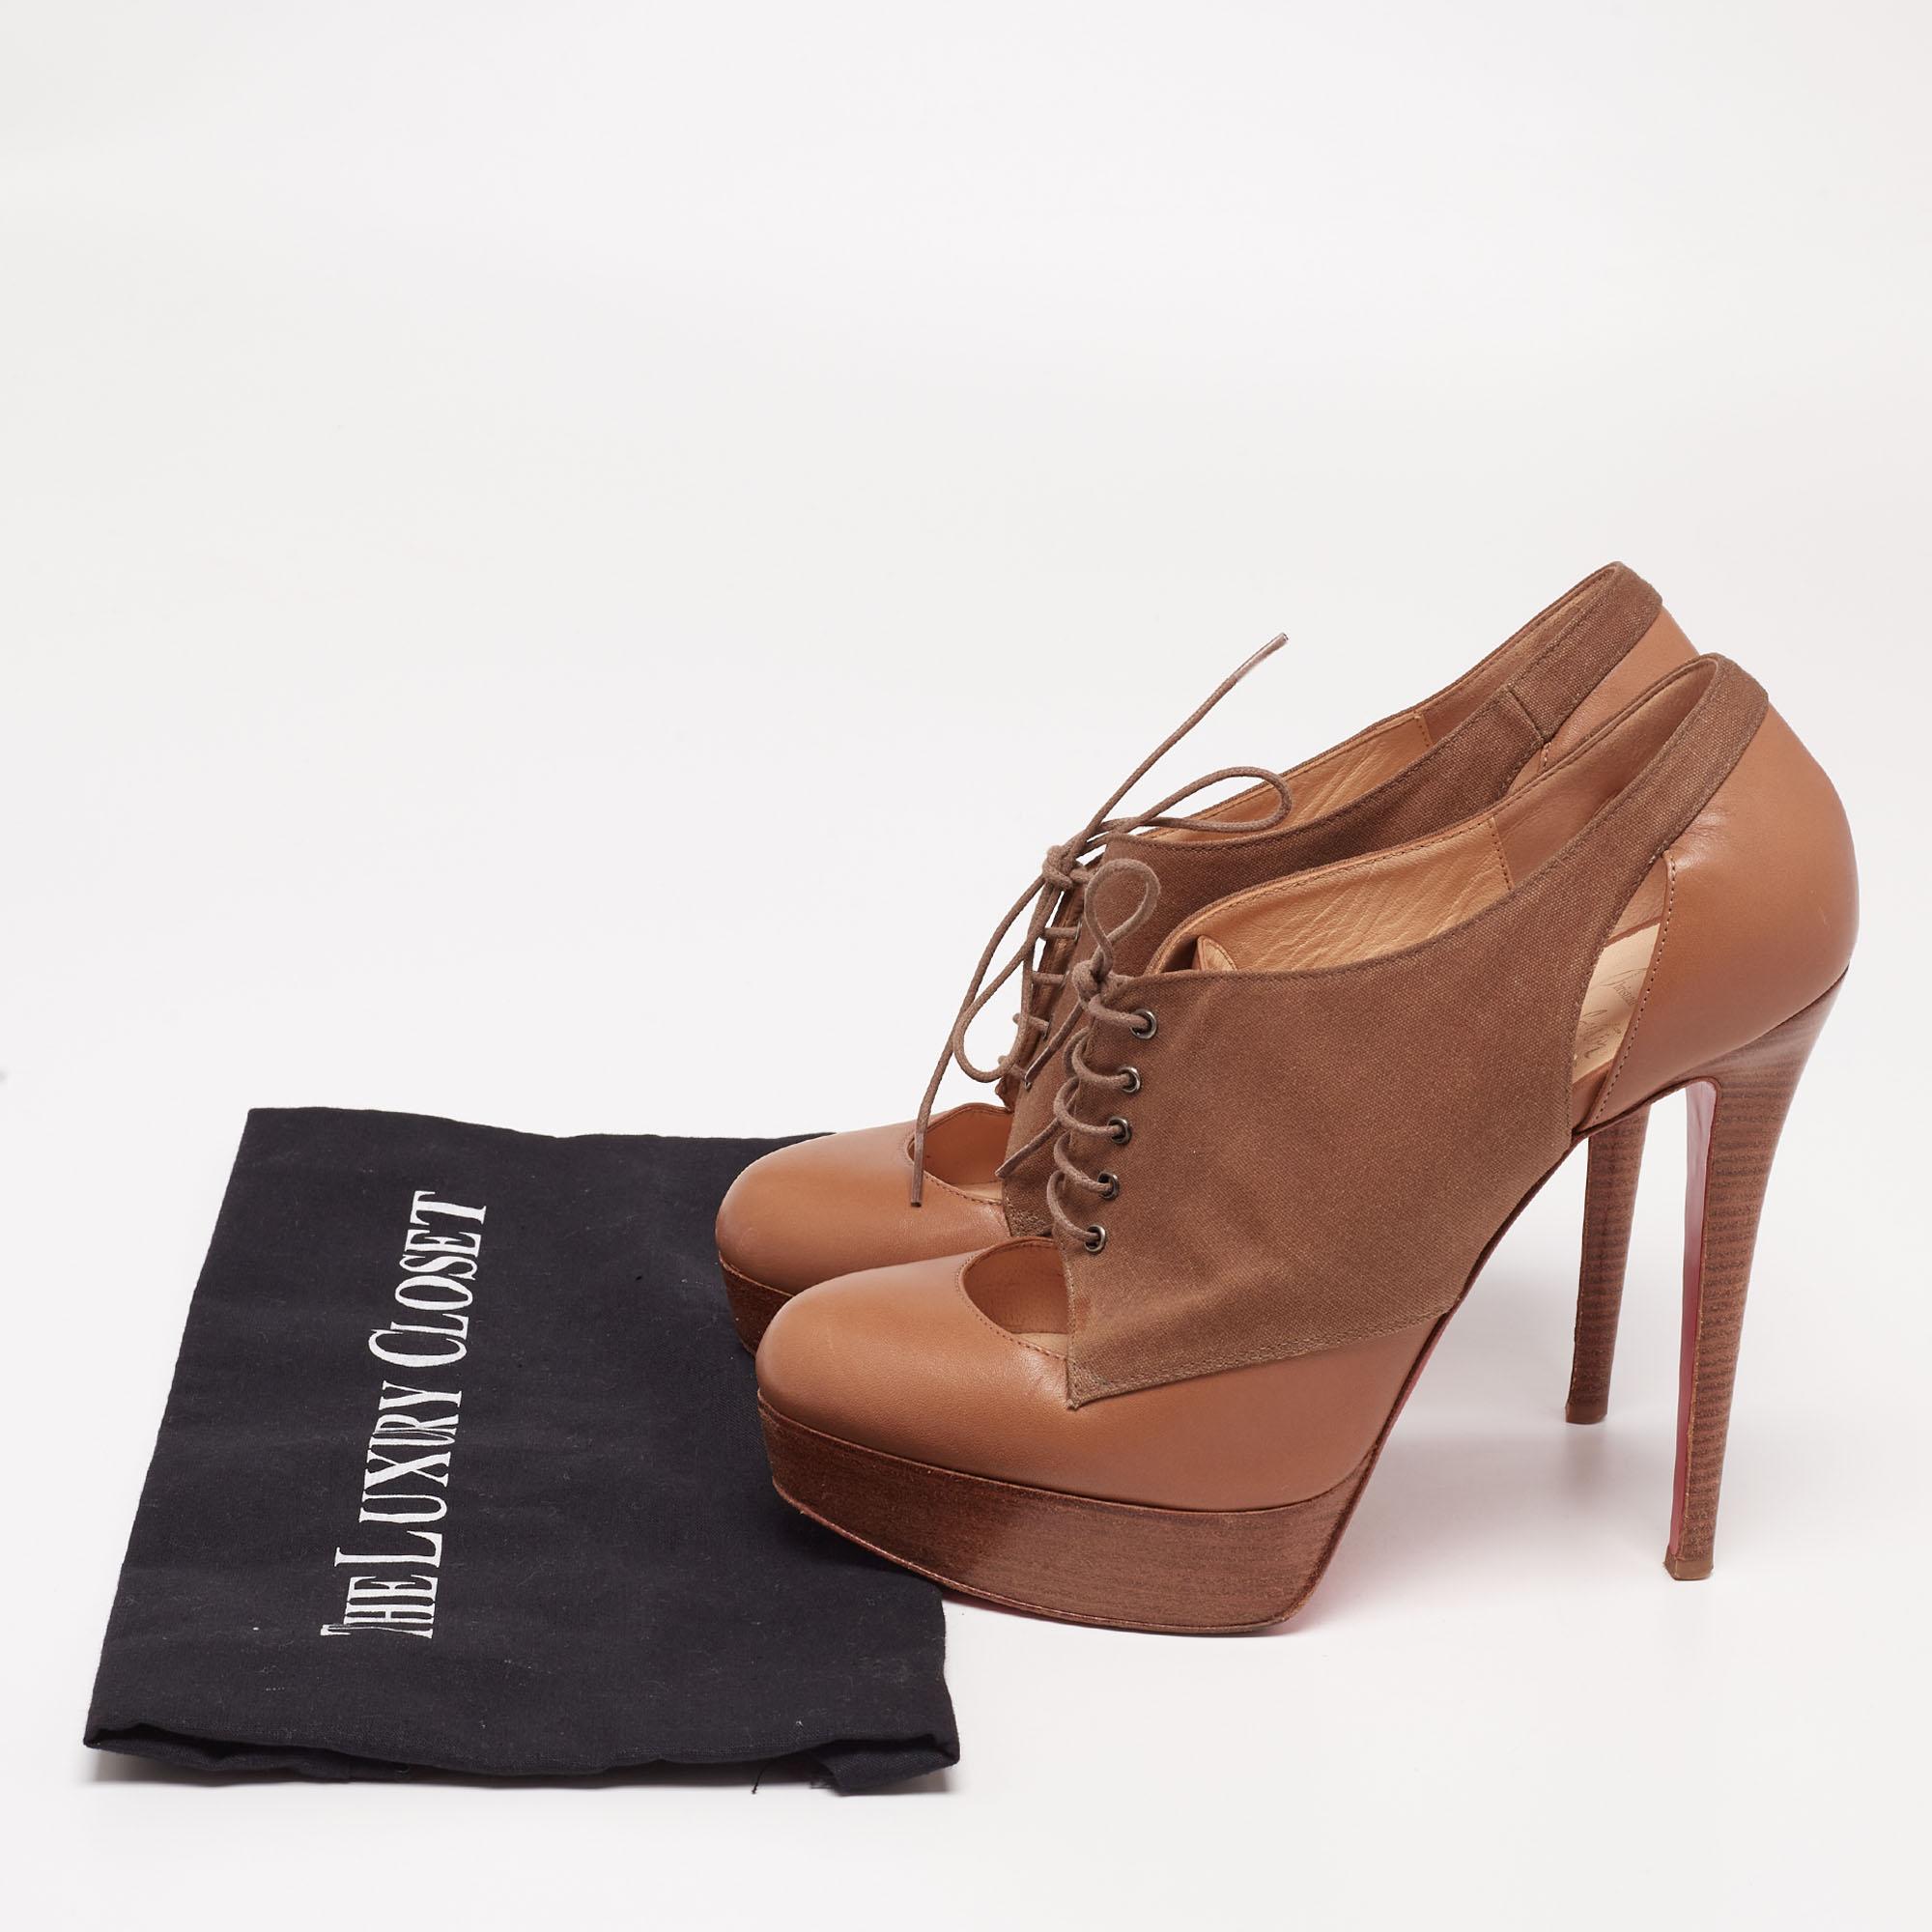 Christian Louboutin Tan/Brown Leather and Canvas Lace-Up Ankle Booties Size 39.5 In Good Condition For Sale In Dubai, Al Qouz 2